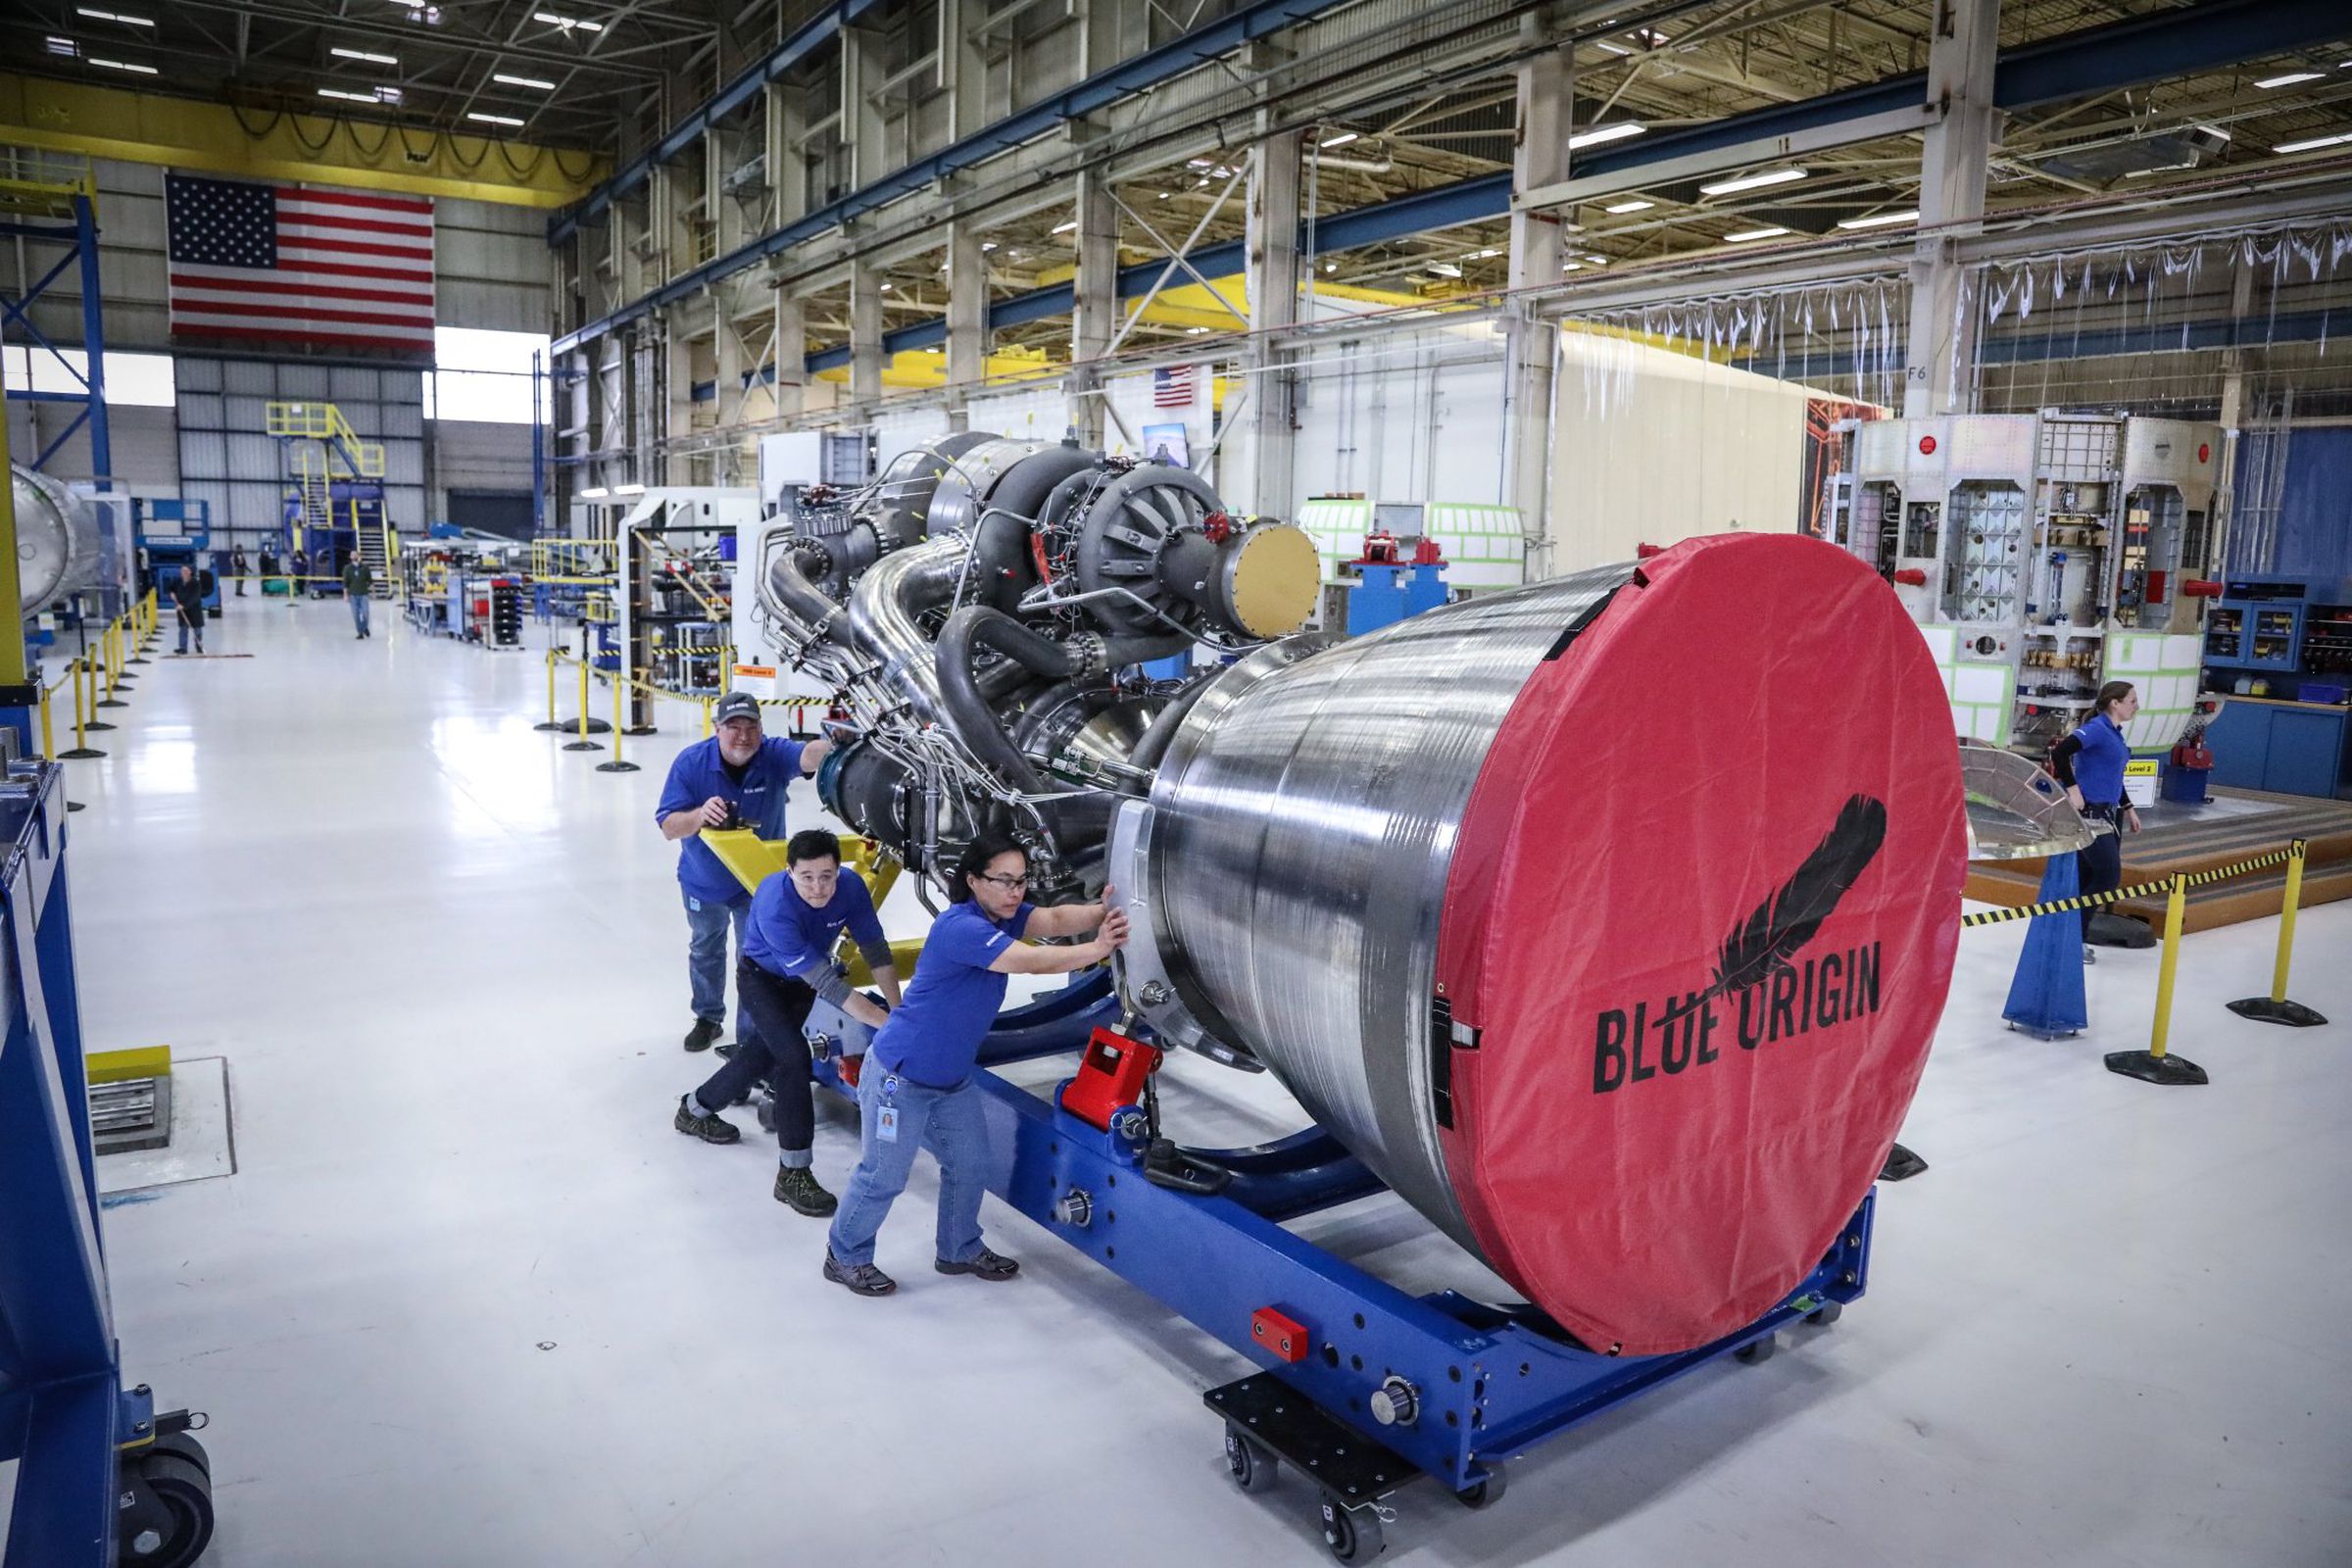 A Blue Origin BE-4 rocket engine. As many as seven of these engines is expected to propel the company’s New Glenn vehicle into Earth’s orbit. 